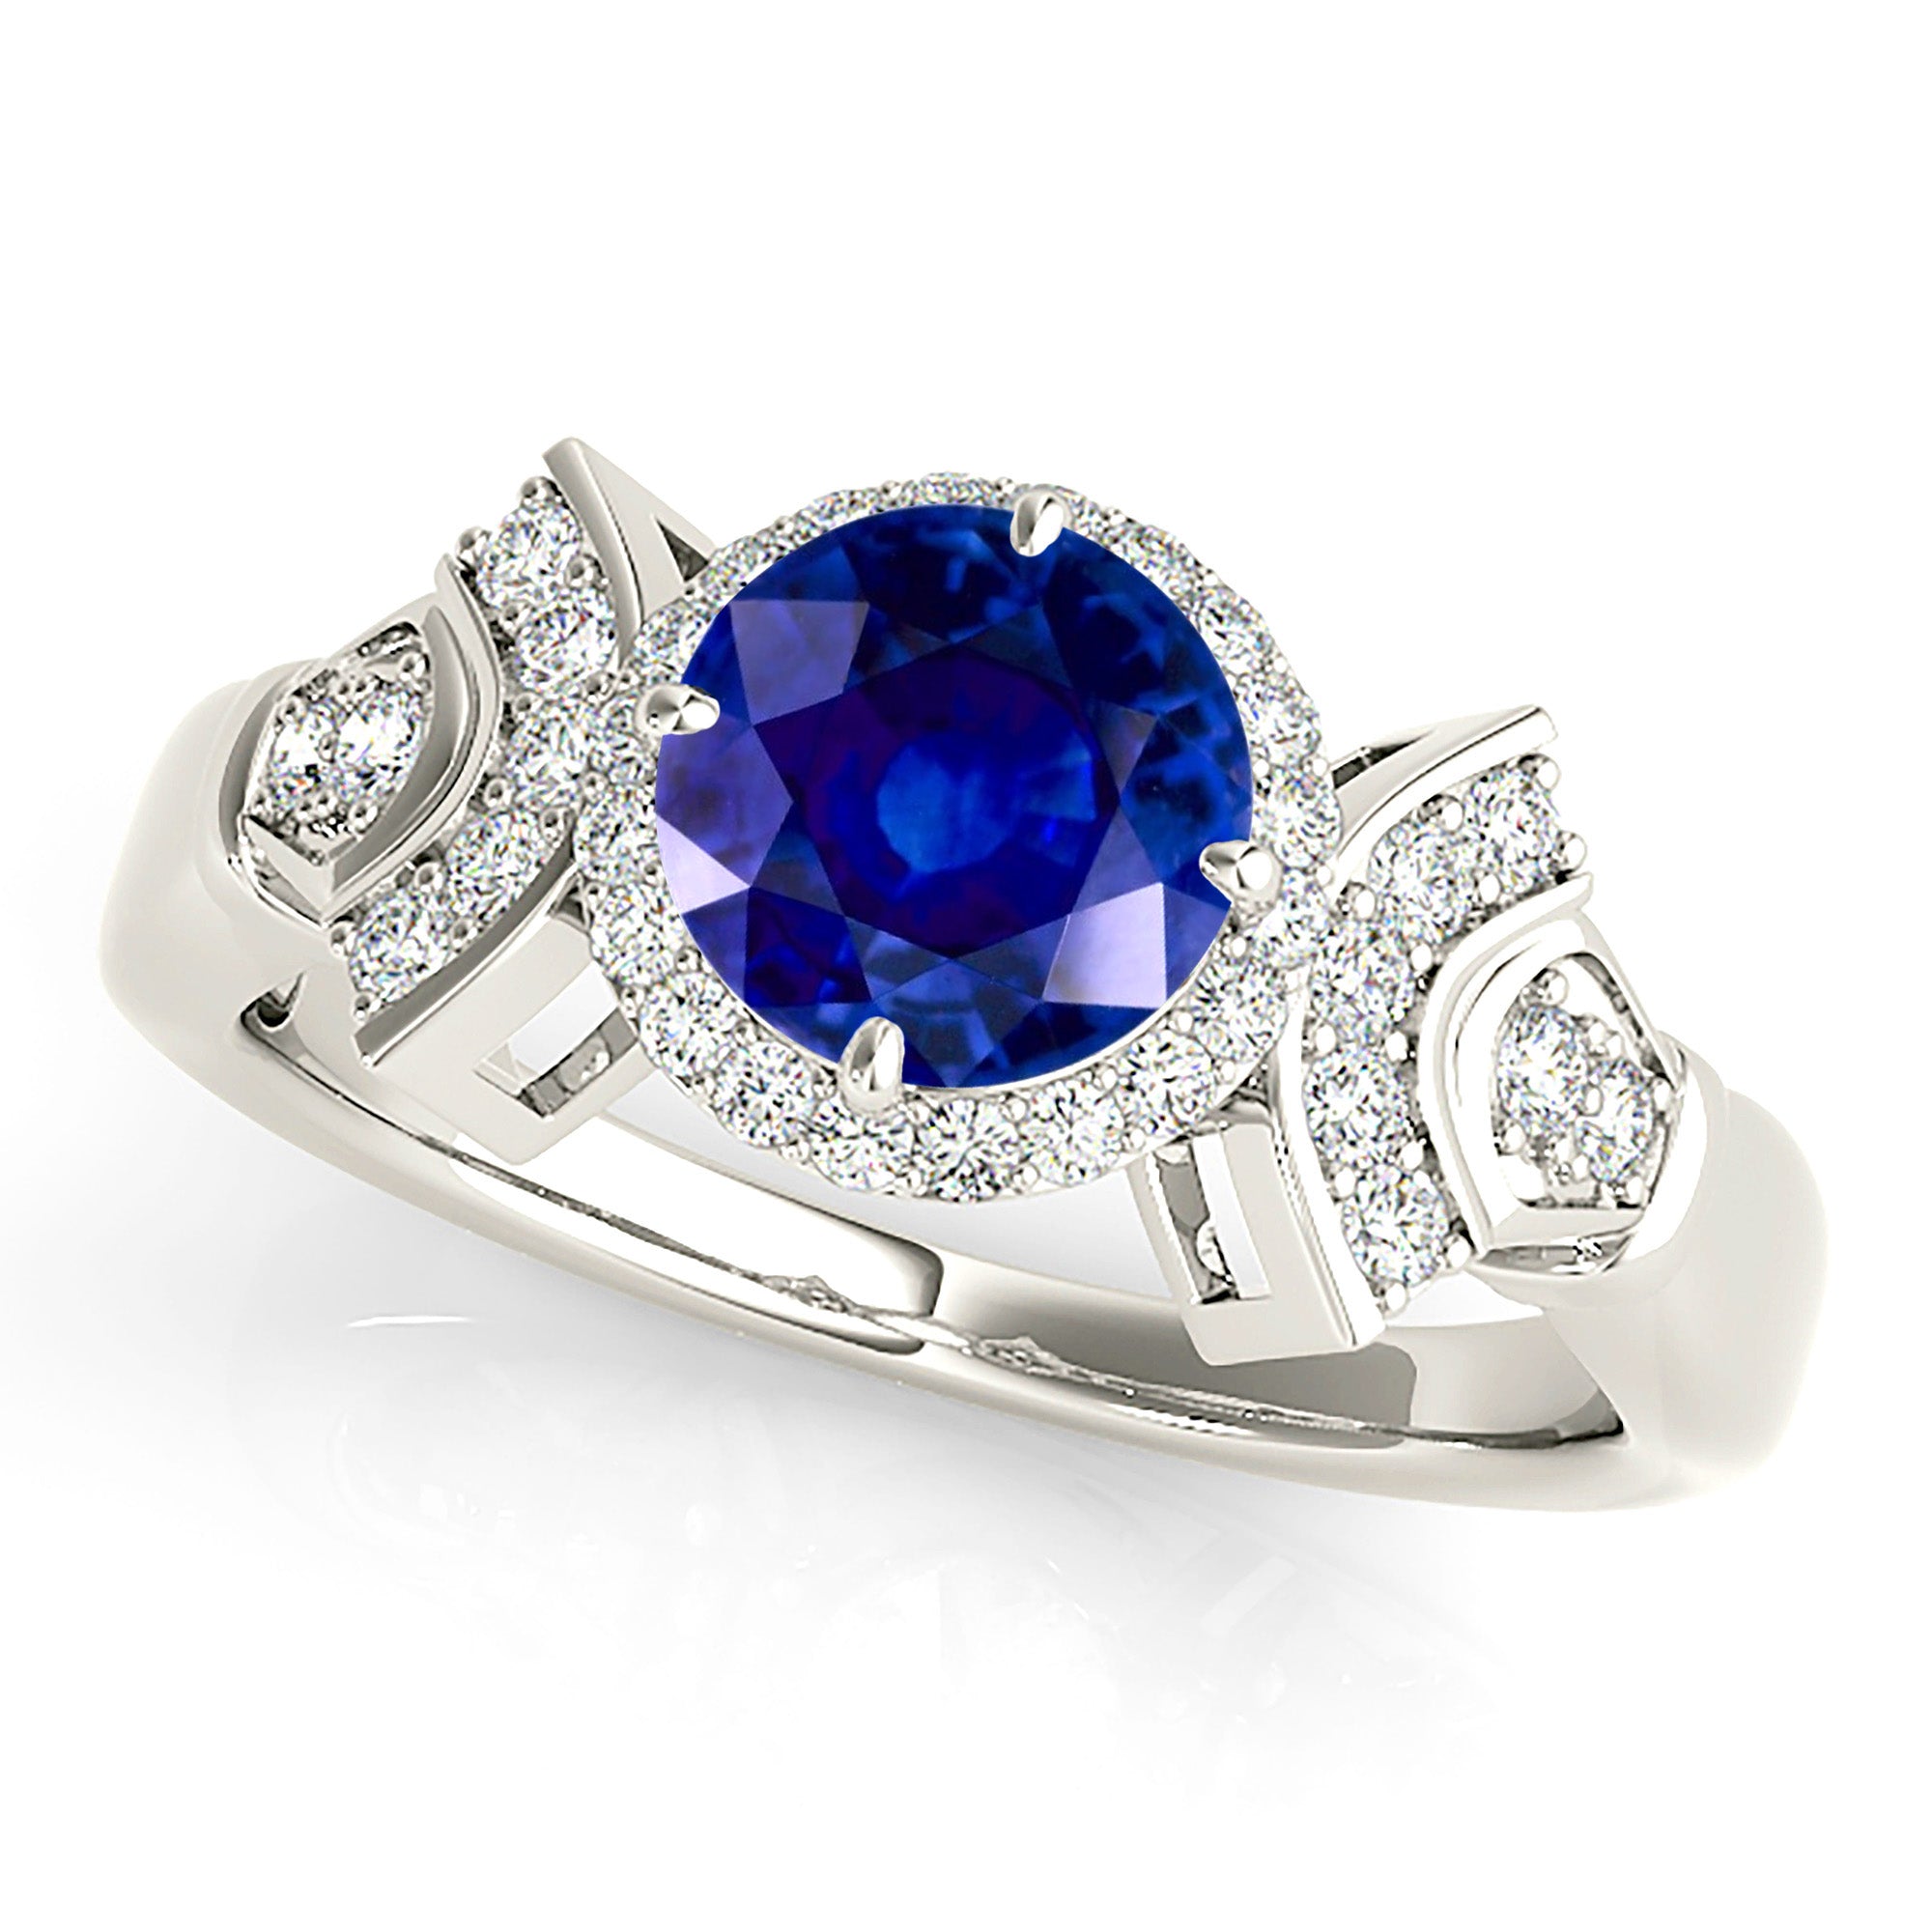 1.46 ct. Genuine Blue Sapphire Halo Ring Special Designed with 0.25 ctw. Side Diamonds-in 14K/18K White, Yellow, Rose Gold and Platinum - Christmas Jewelry Gift -VIRABYANI